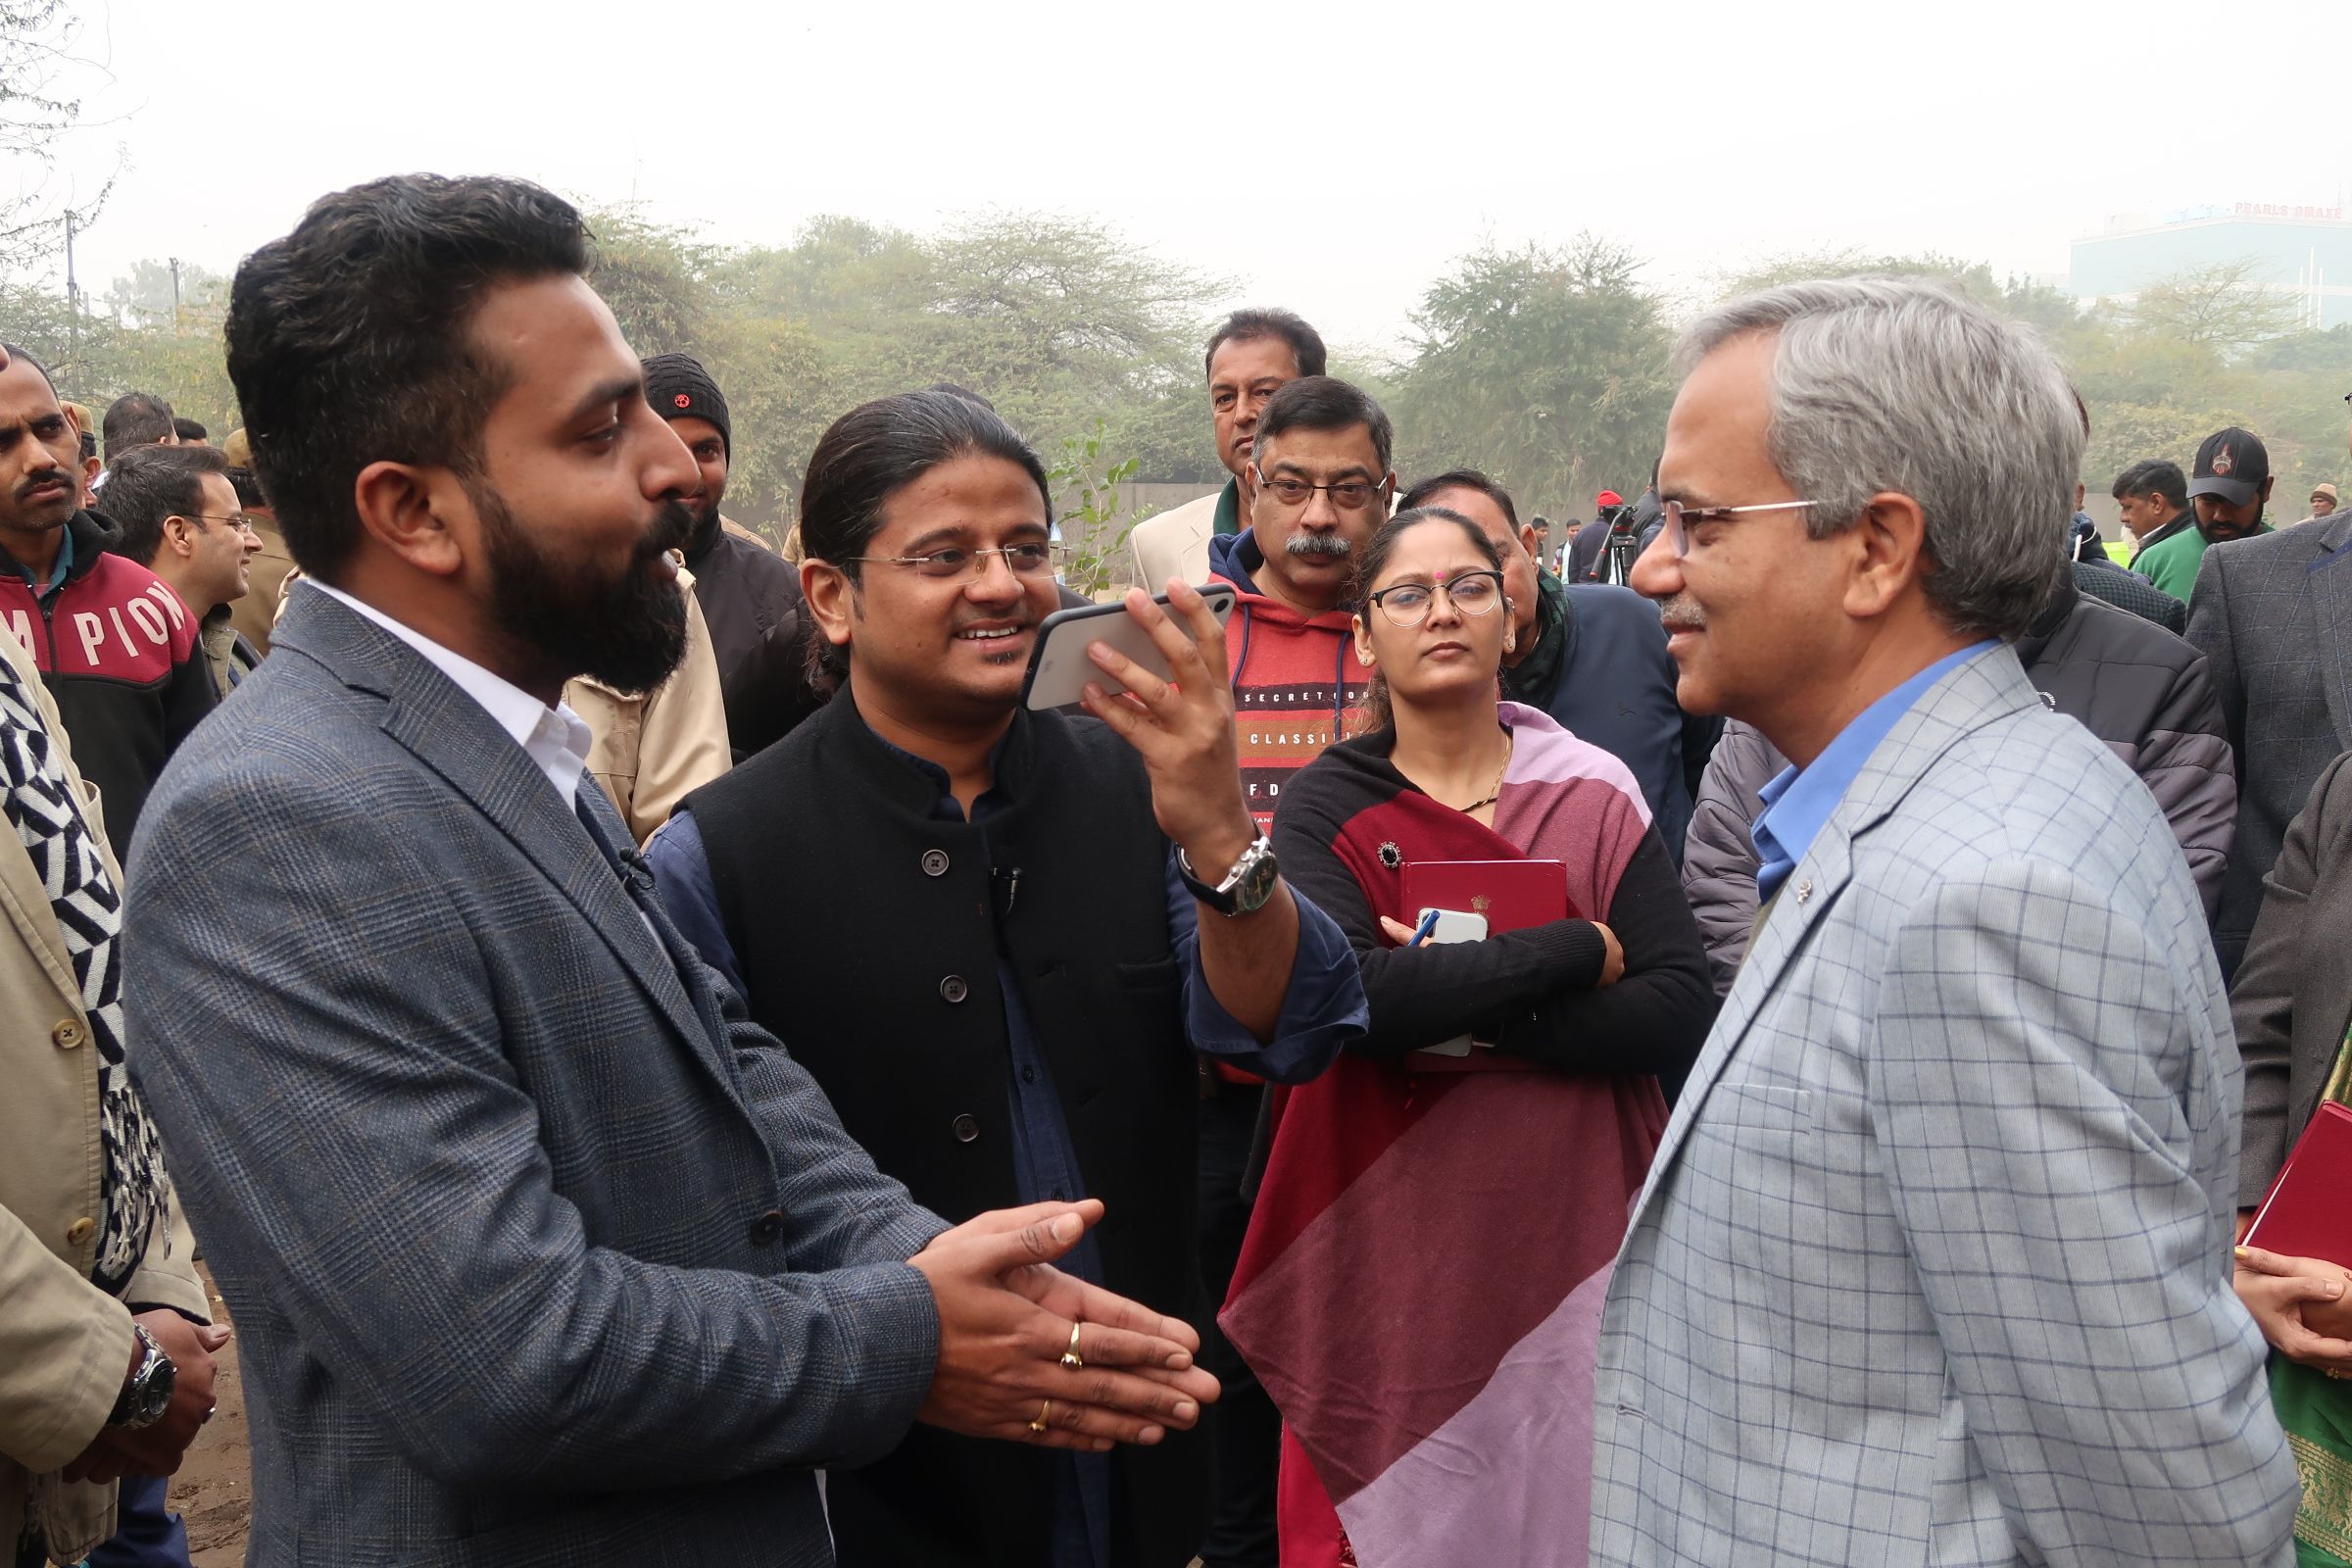 Every Vote is a seed to strengthen Democracy, said Dr. Ranbir Singh, CEO, Delhi while inaugurating the first man made forest in North Delhi Municipal Corporation on Tuesday.